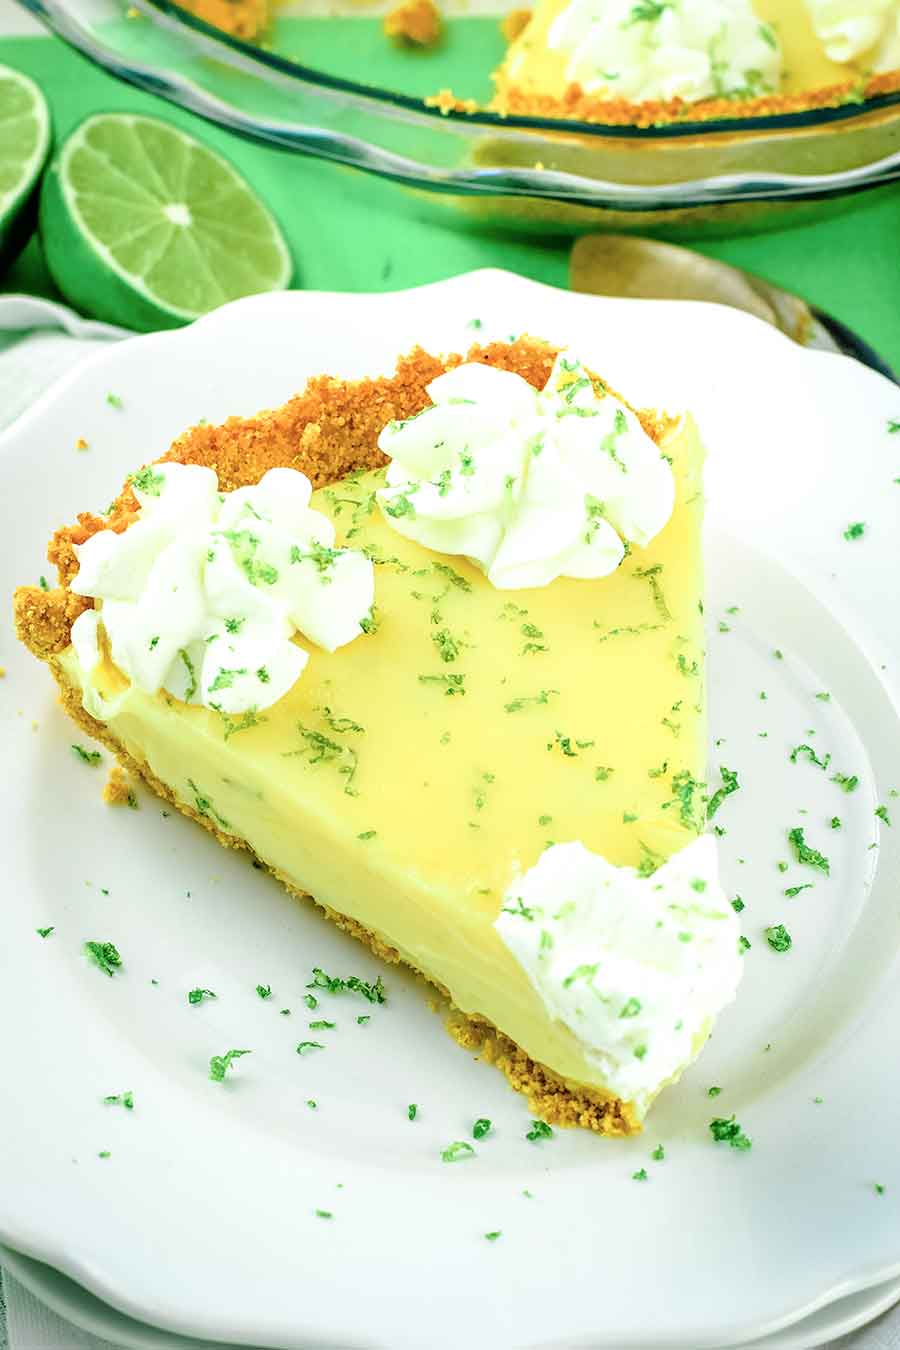 Best Key Lime Pie Recipe - Soulfully Made